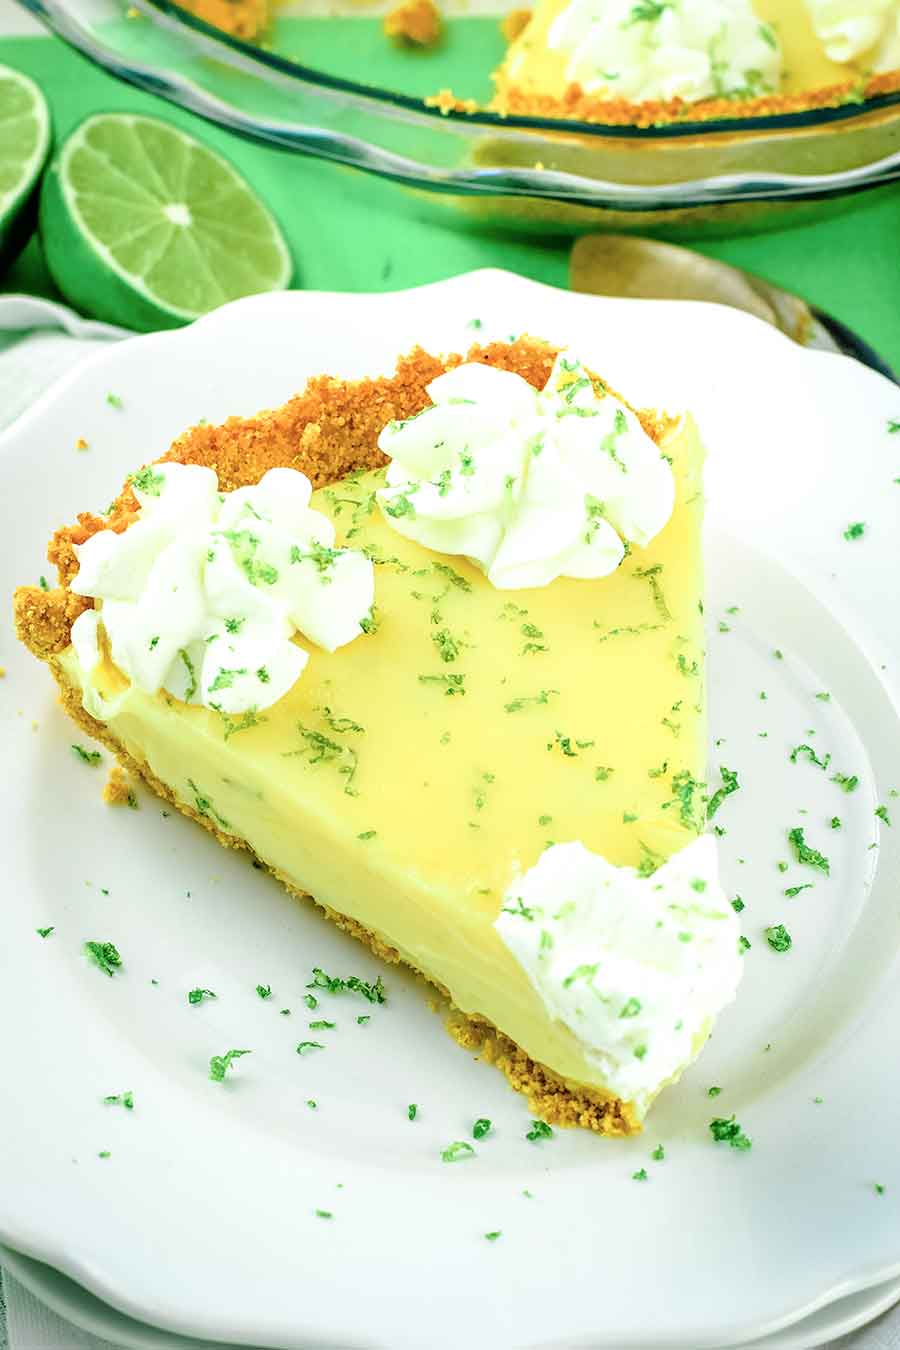 Best Key Lime Pie Recipe - Soulfully Made